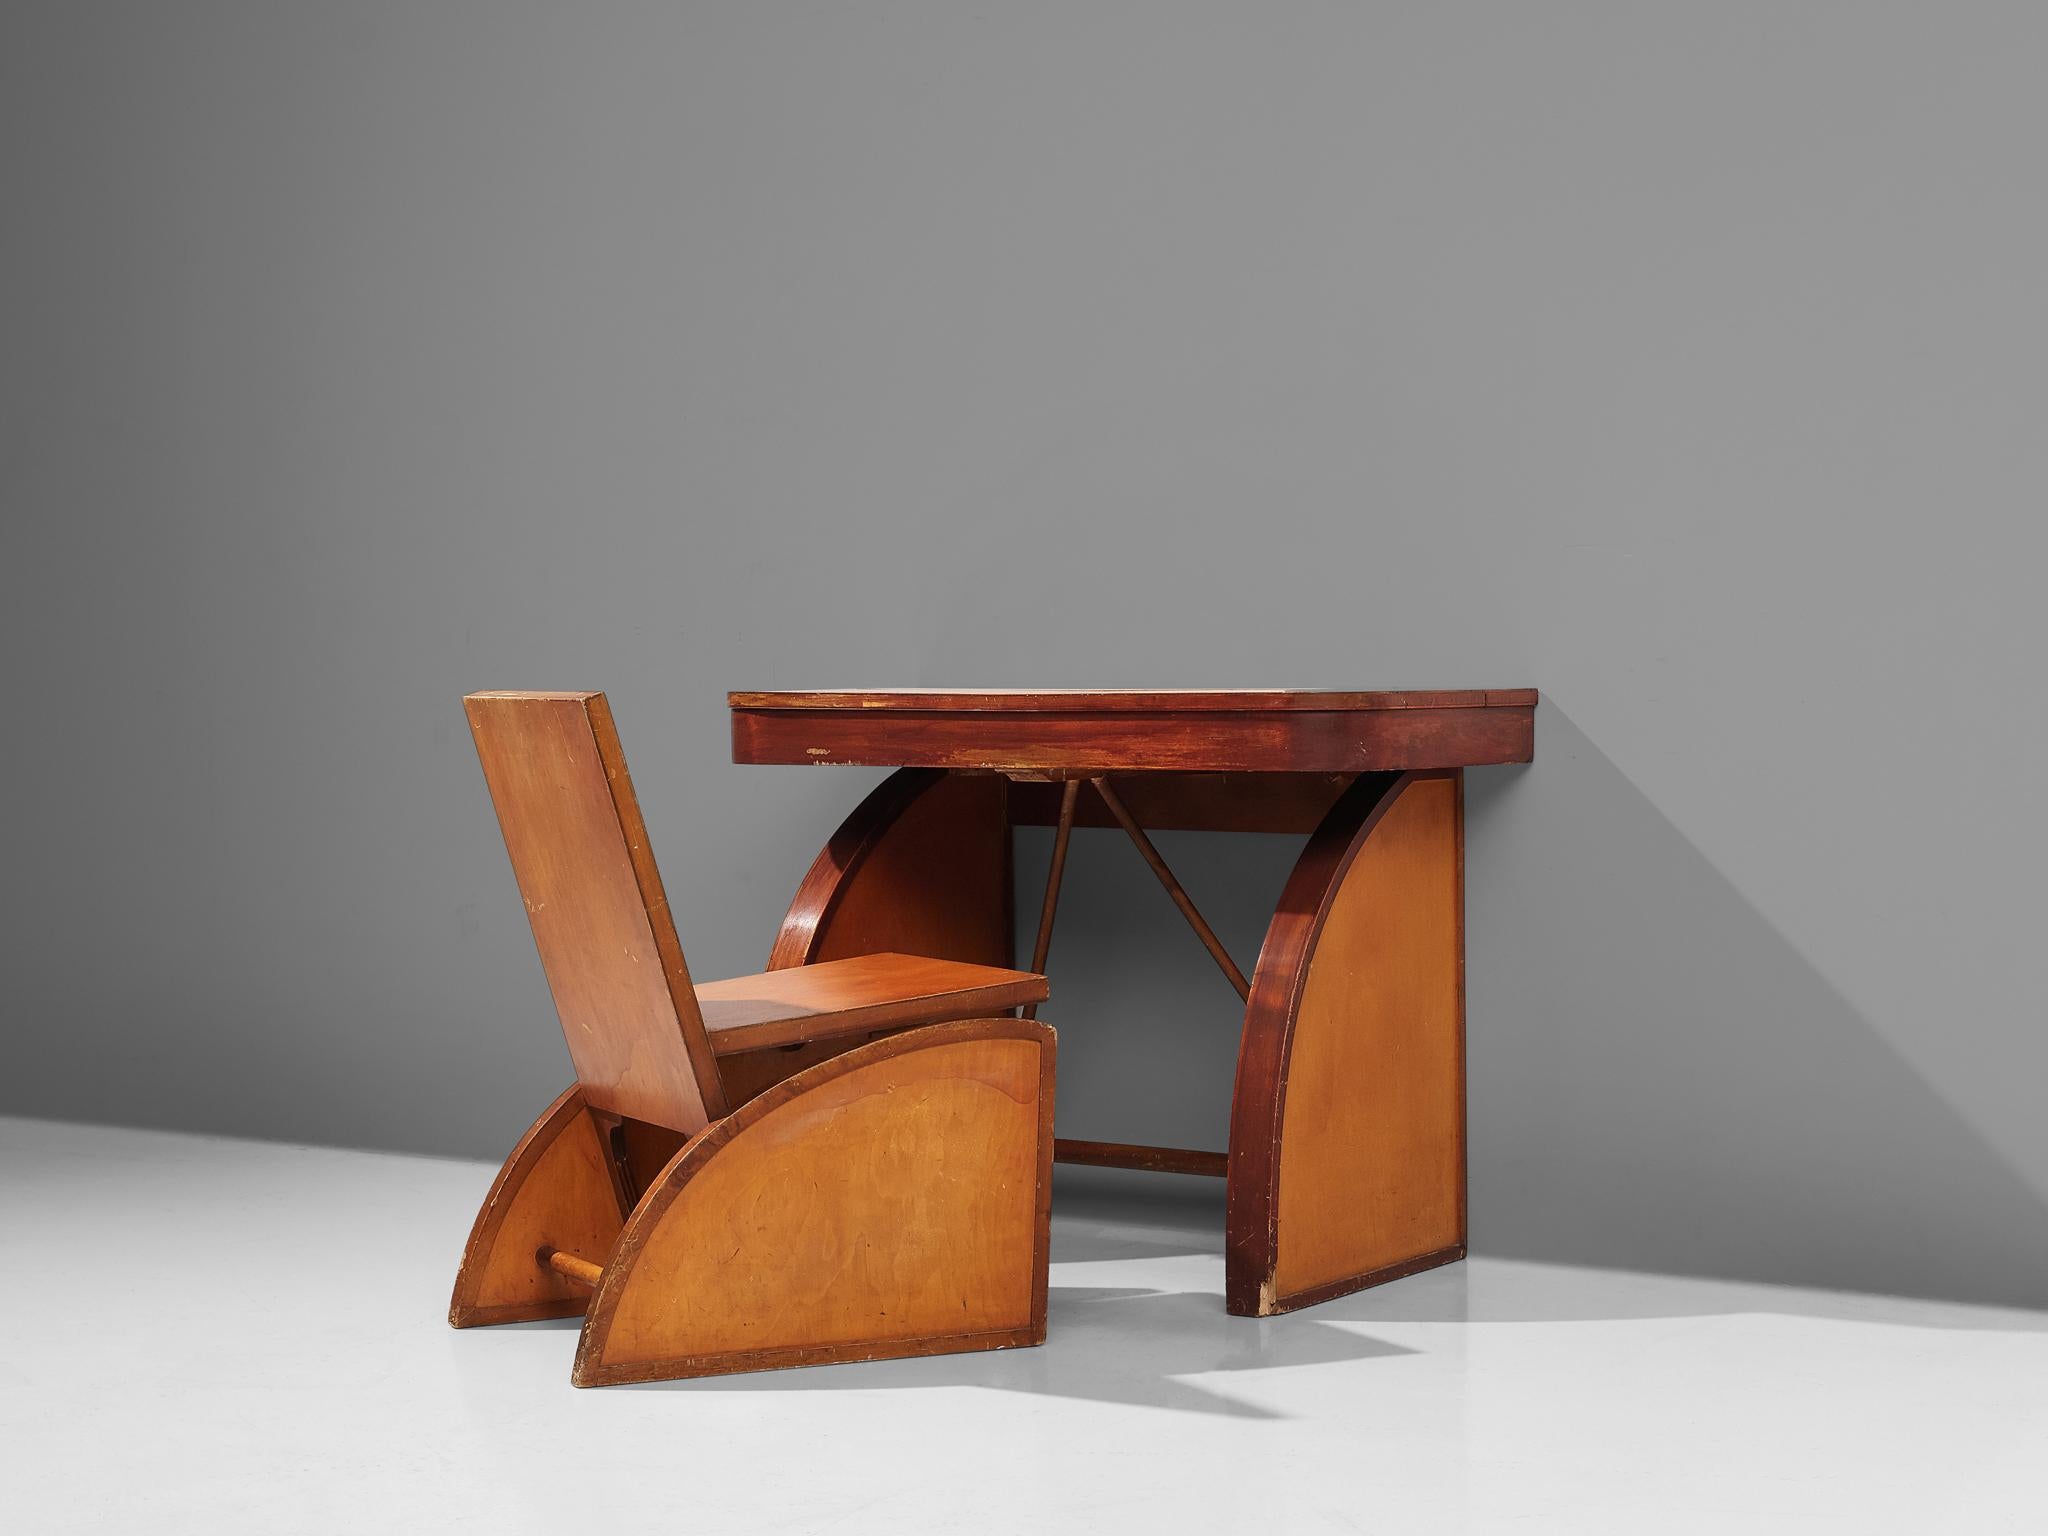 Brown Saltman, desk with chair, wood, United States, circa 1940s

A cubist desk with chair. This set holds a similar idiom with clear forms and lines. Both the chair and the desk are resting on triangular legs. These triangles have two angular,